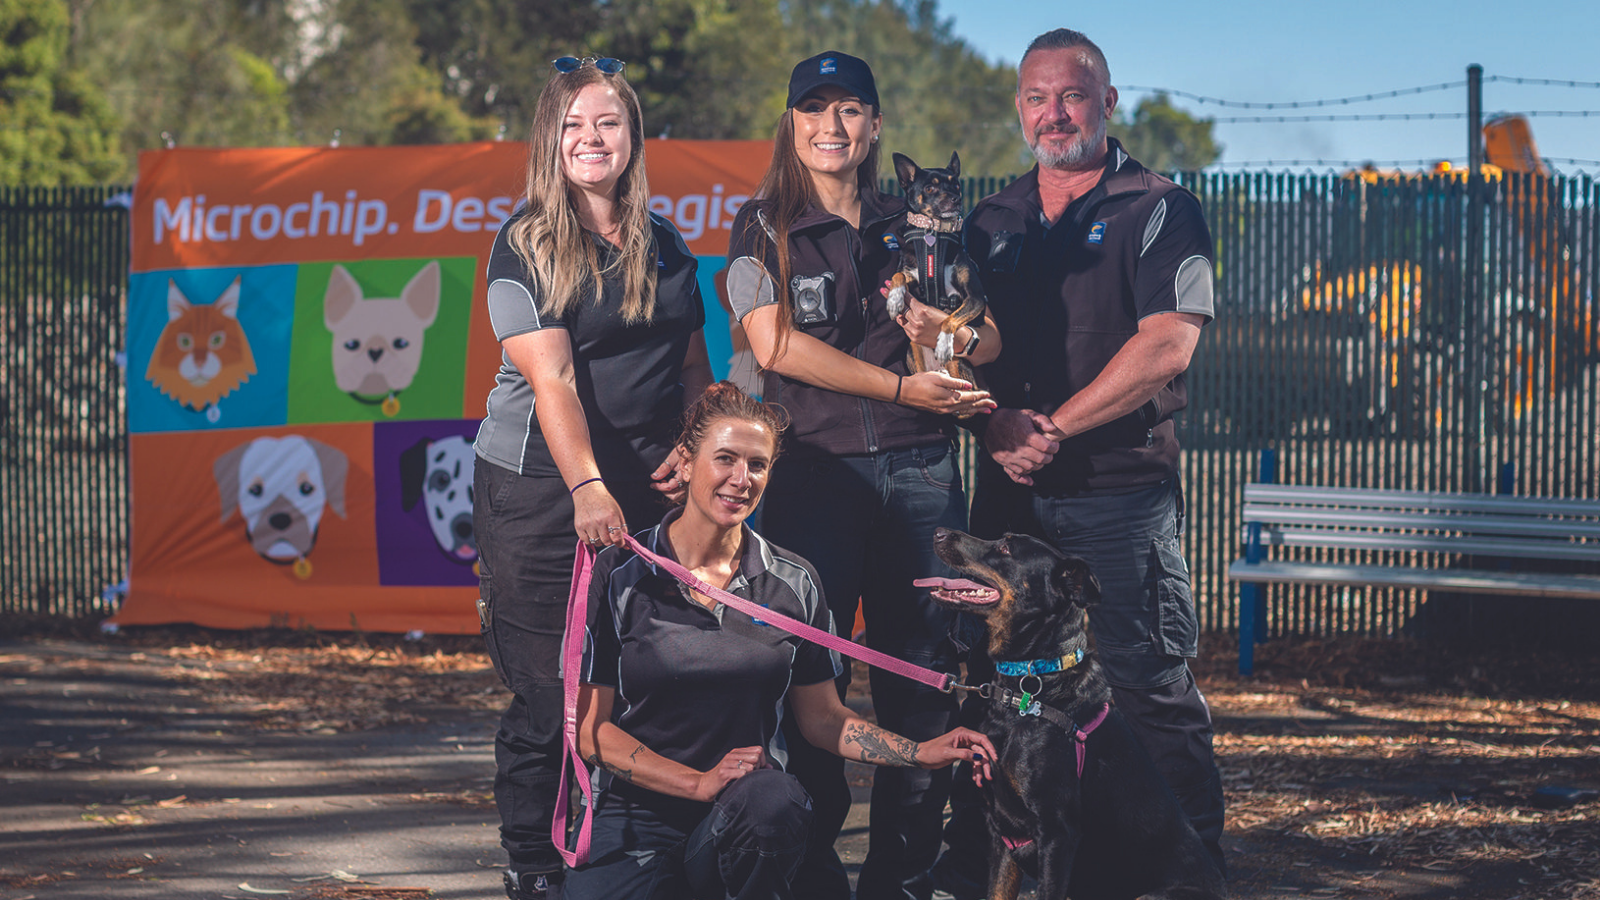 Five staff in brimbank uniforms post with dogs of different sizes. They arestanding in front of a banner about brimbank pet registration.